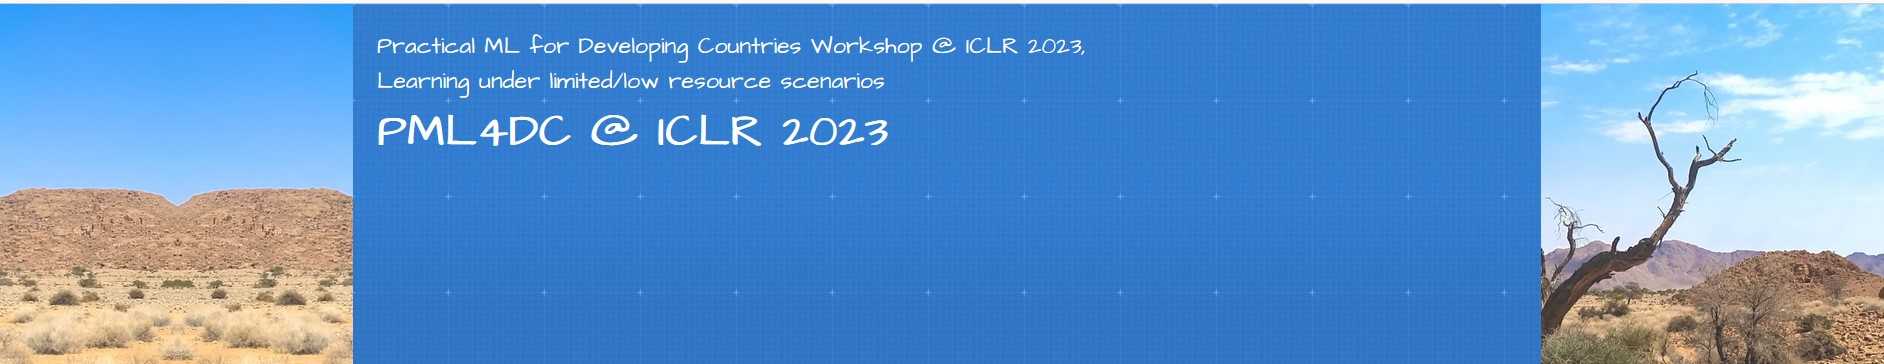 Practical Machine Learning for Developing Countries – Learning under limited/ low resource scenarios, Workshop 5 May 2023 in Kigali, Rwanda